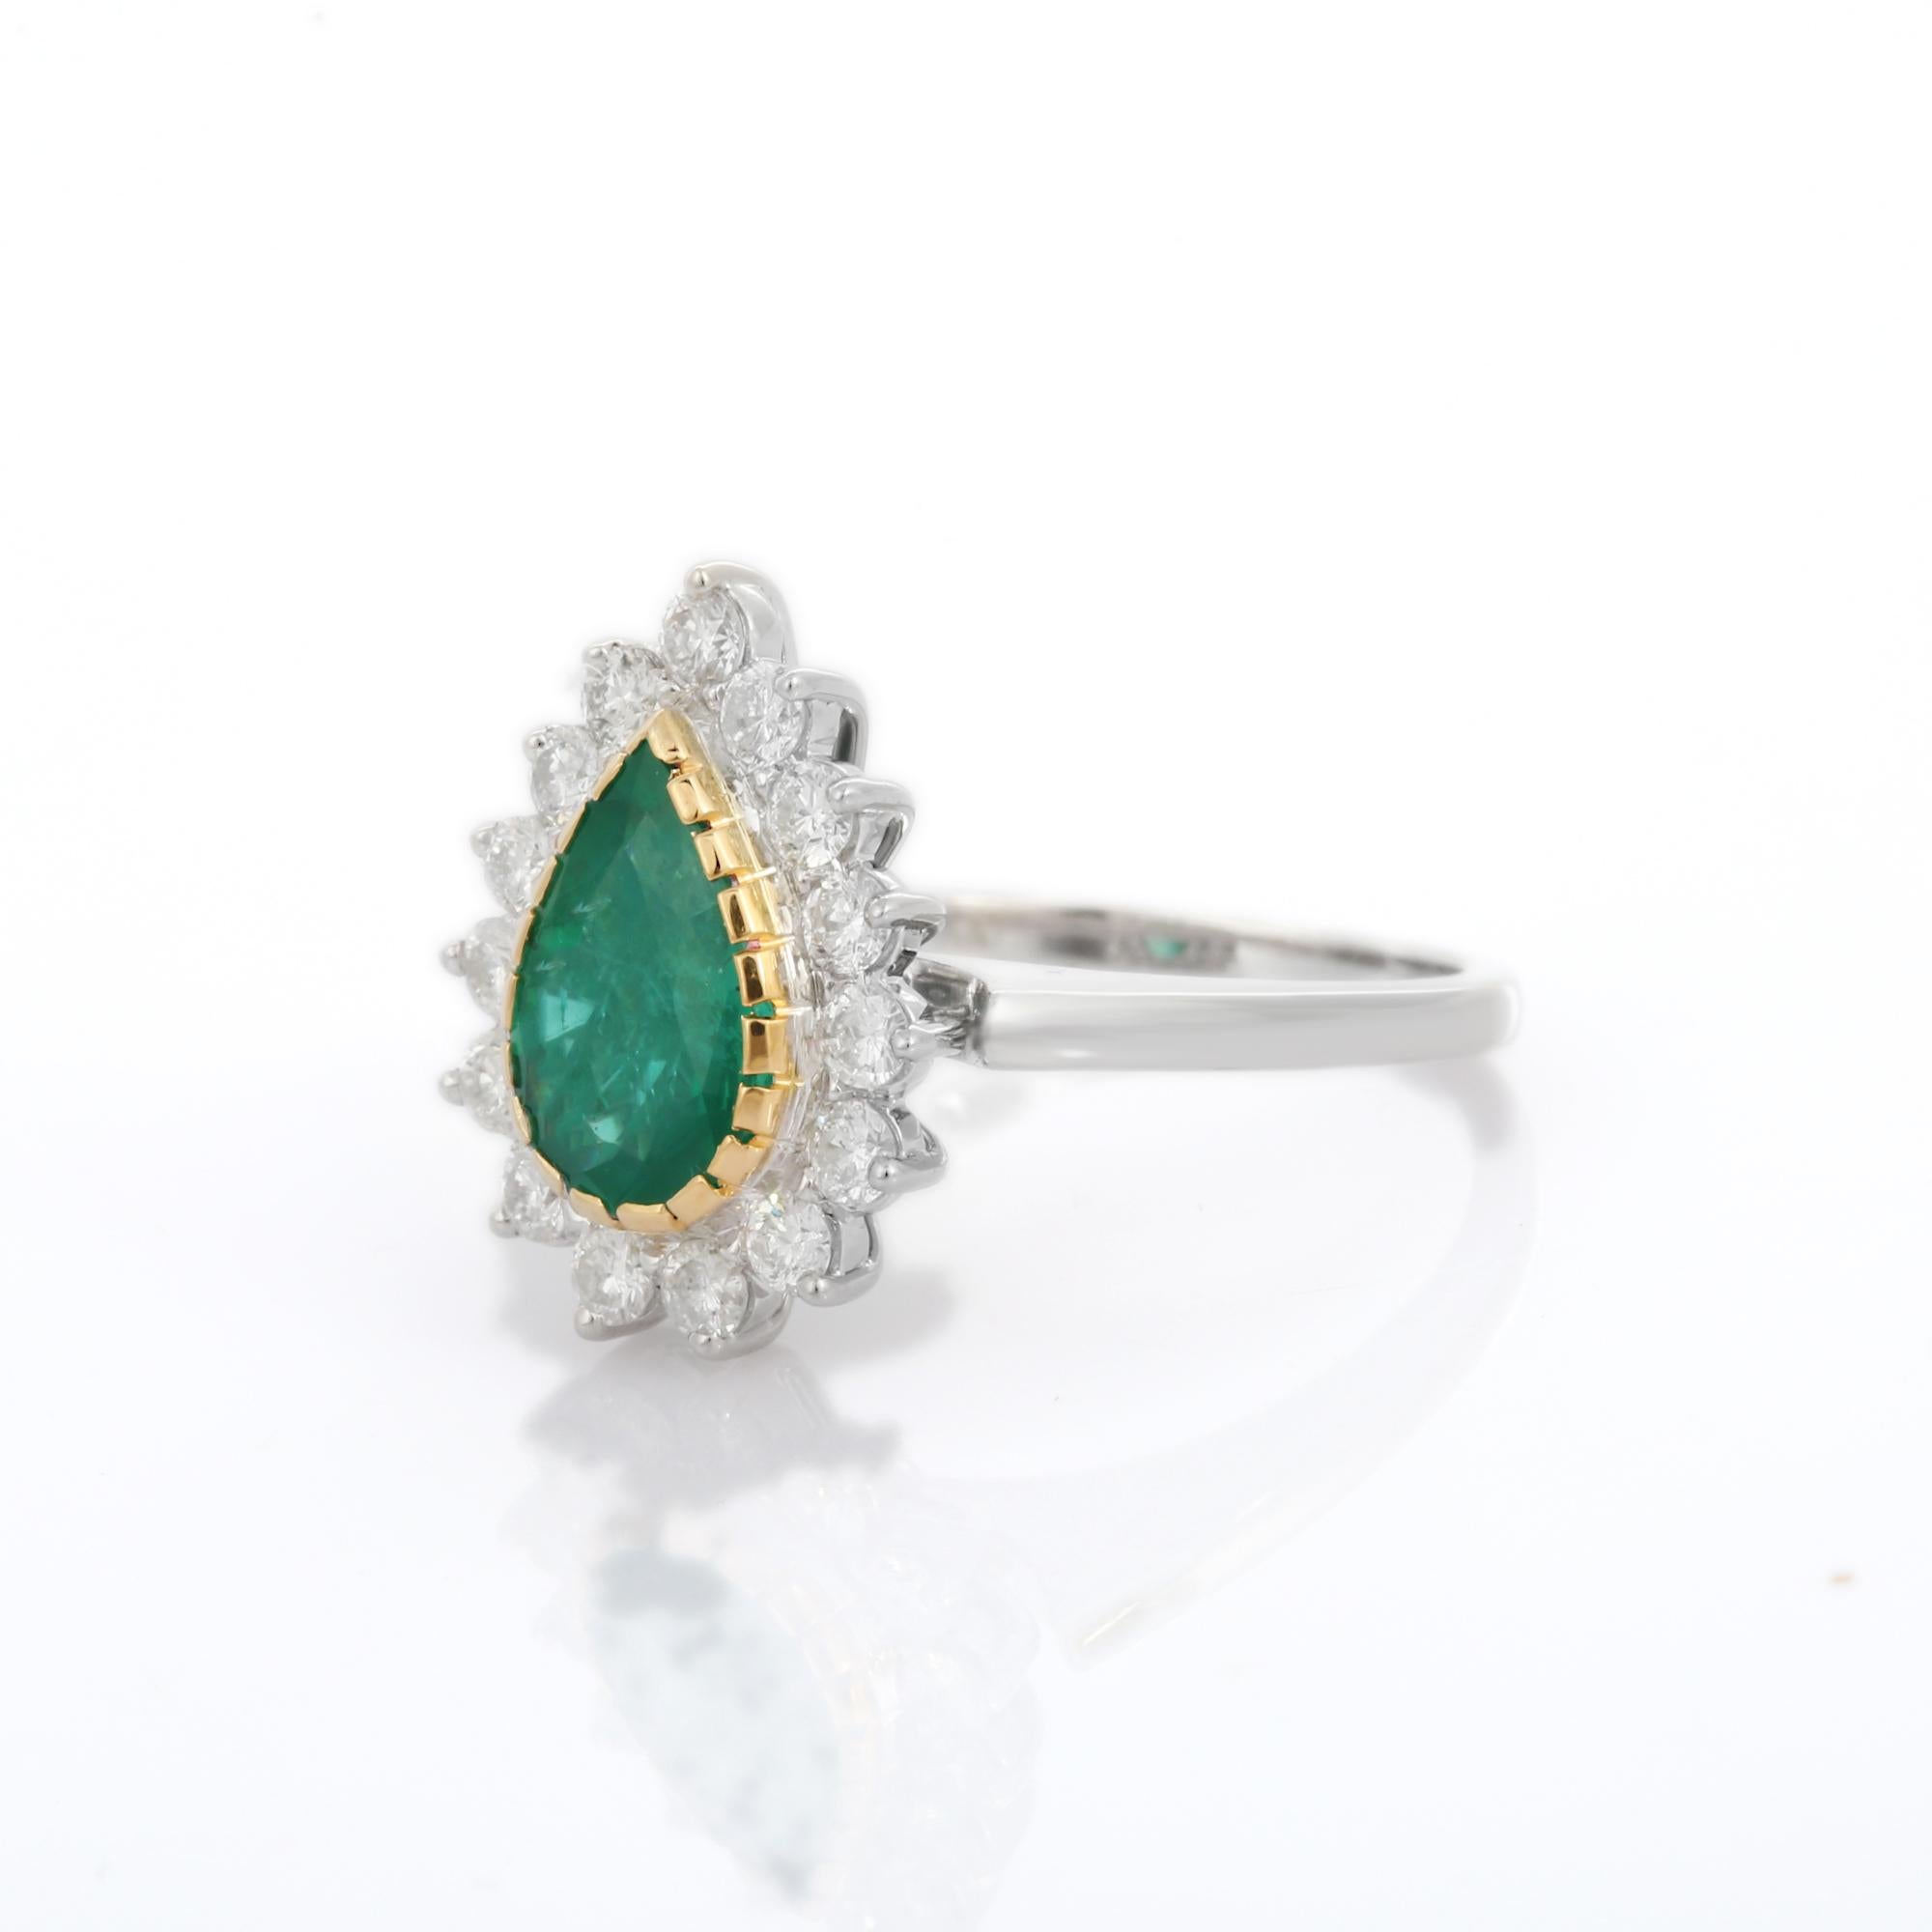 For Sale:  Statement 18k Solid White Gold Pear Emerald Halo Wedding Ring with Diamonds 2